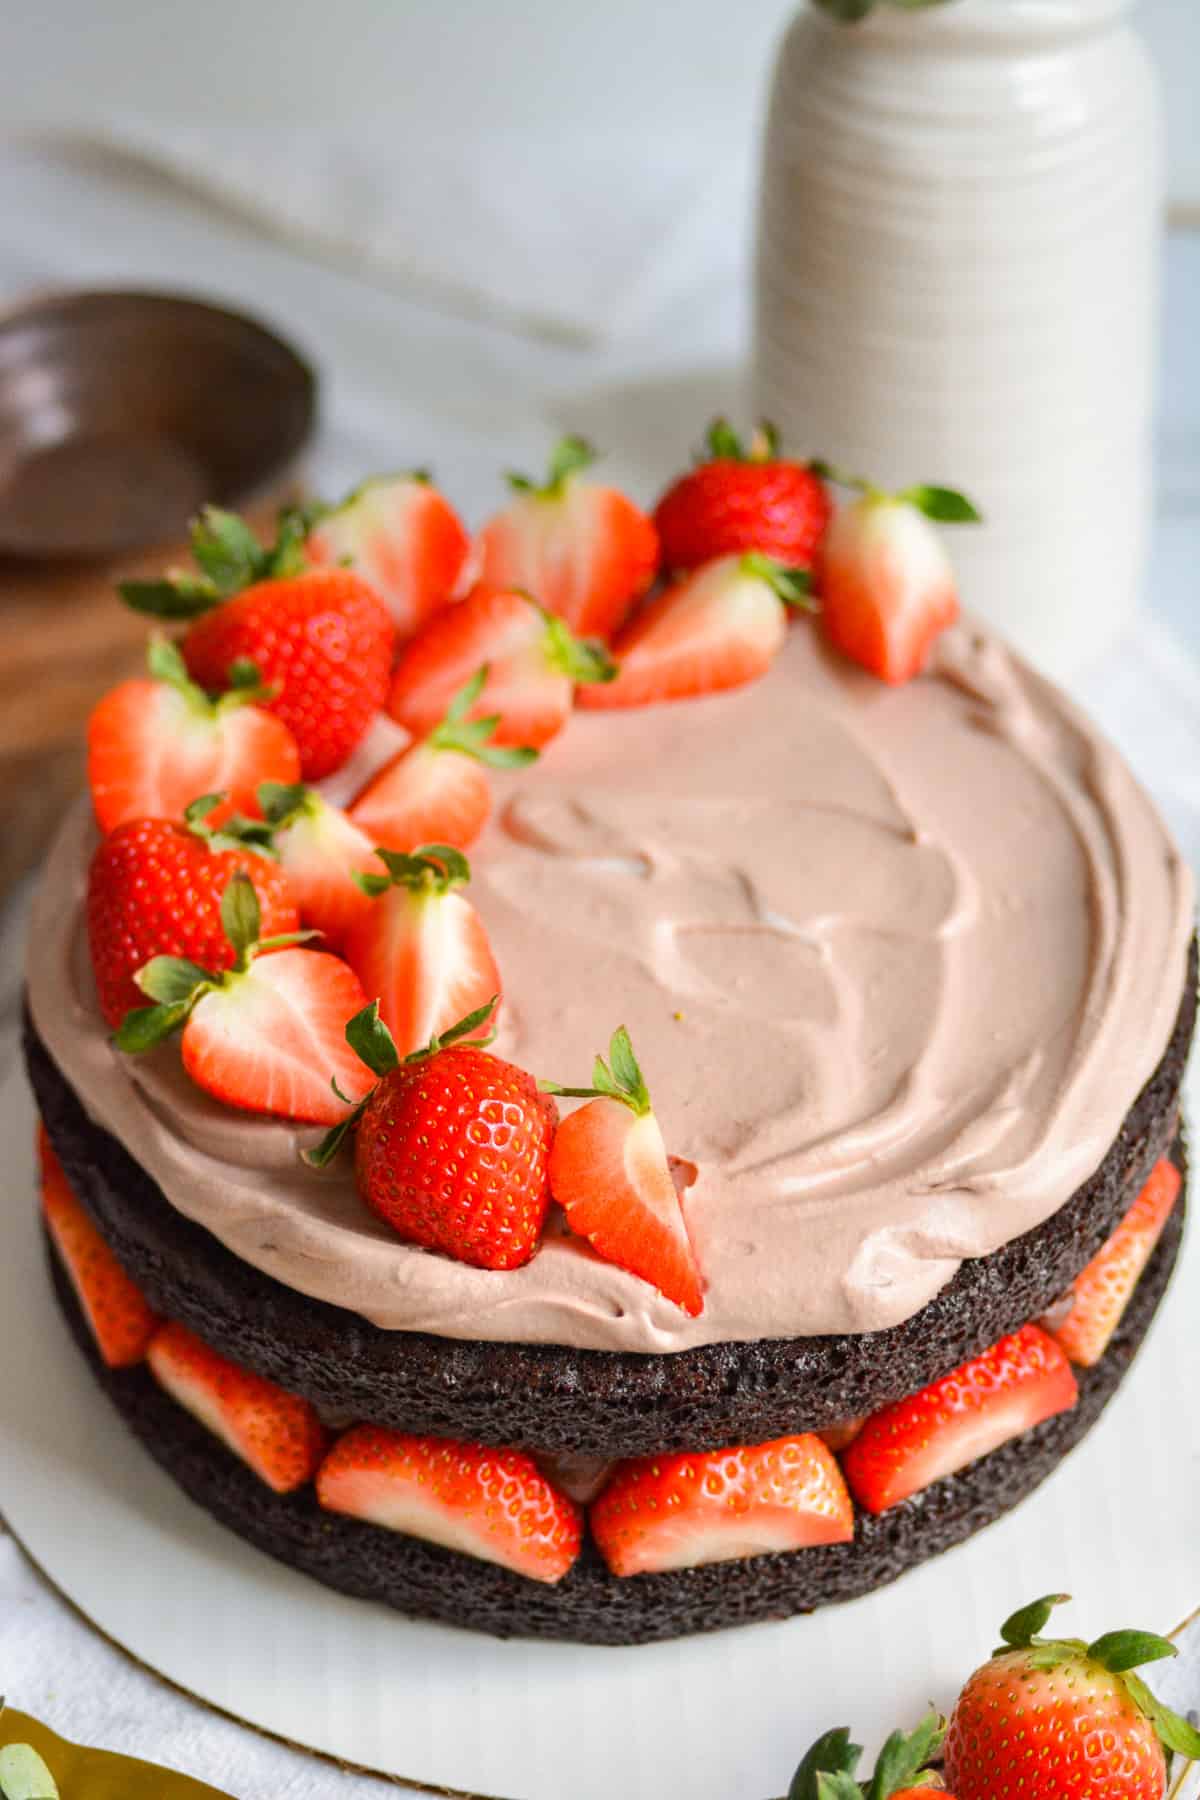 Chocolate whipped cream and strawberries added to the top of the cake.